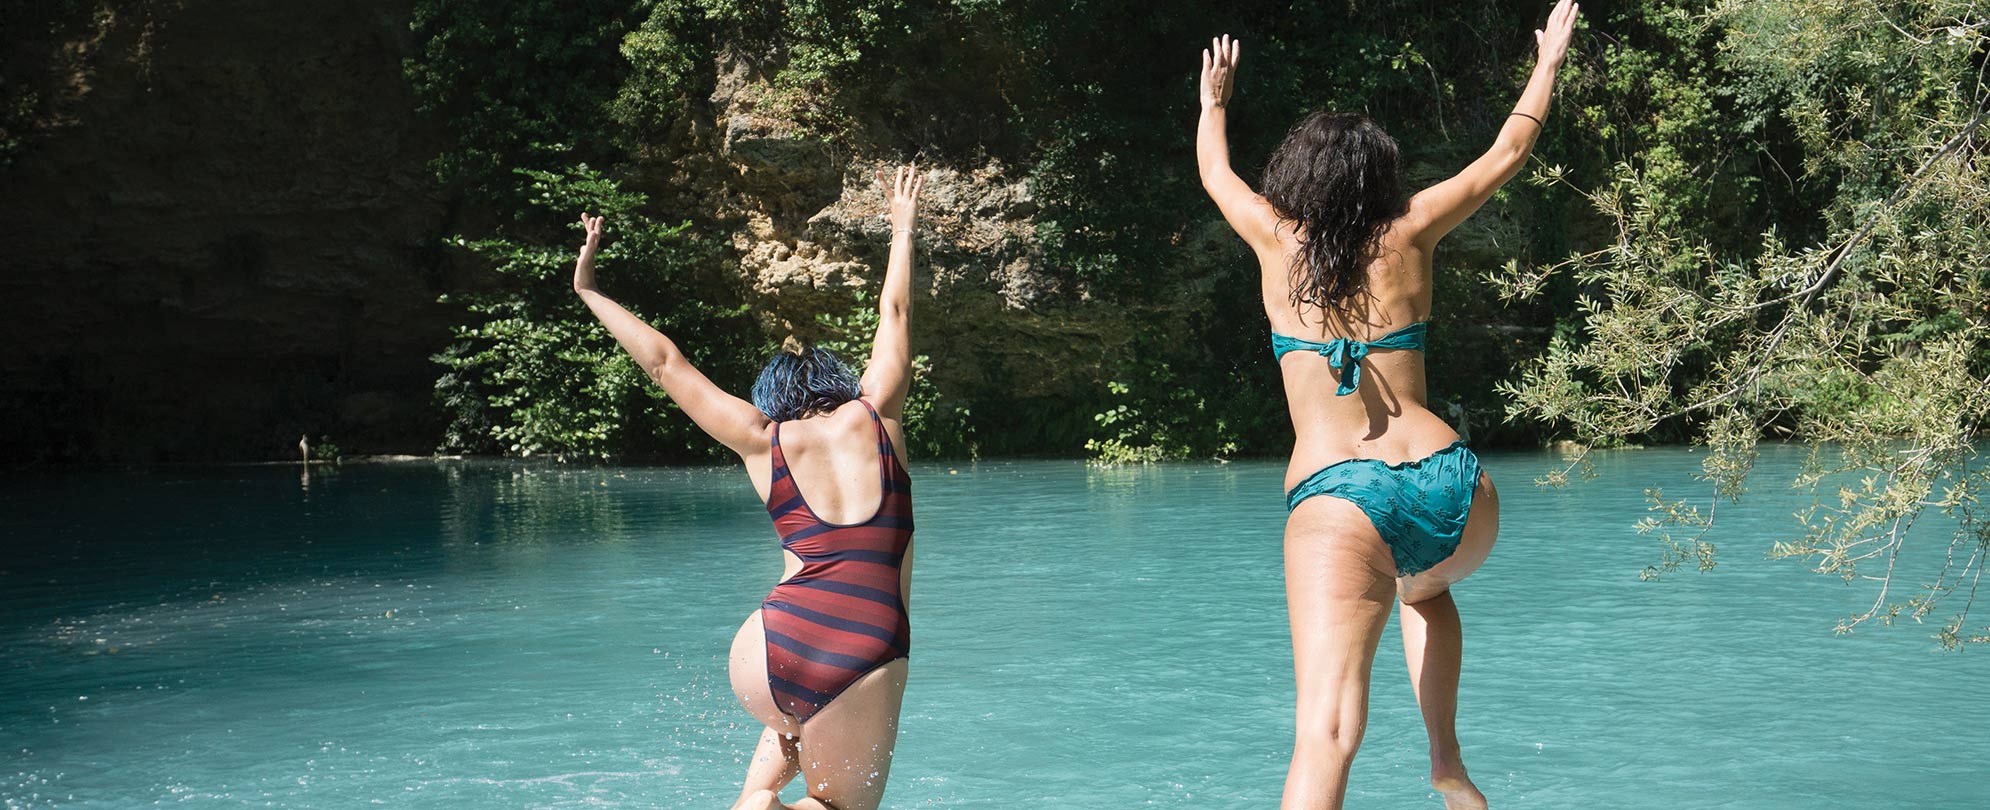 View from behind as two women in bathing suits jump with their arms in the air into a spring surrounded by cliffs and trees.